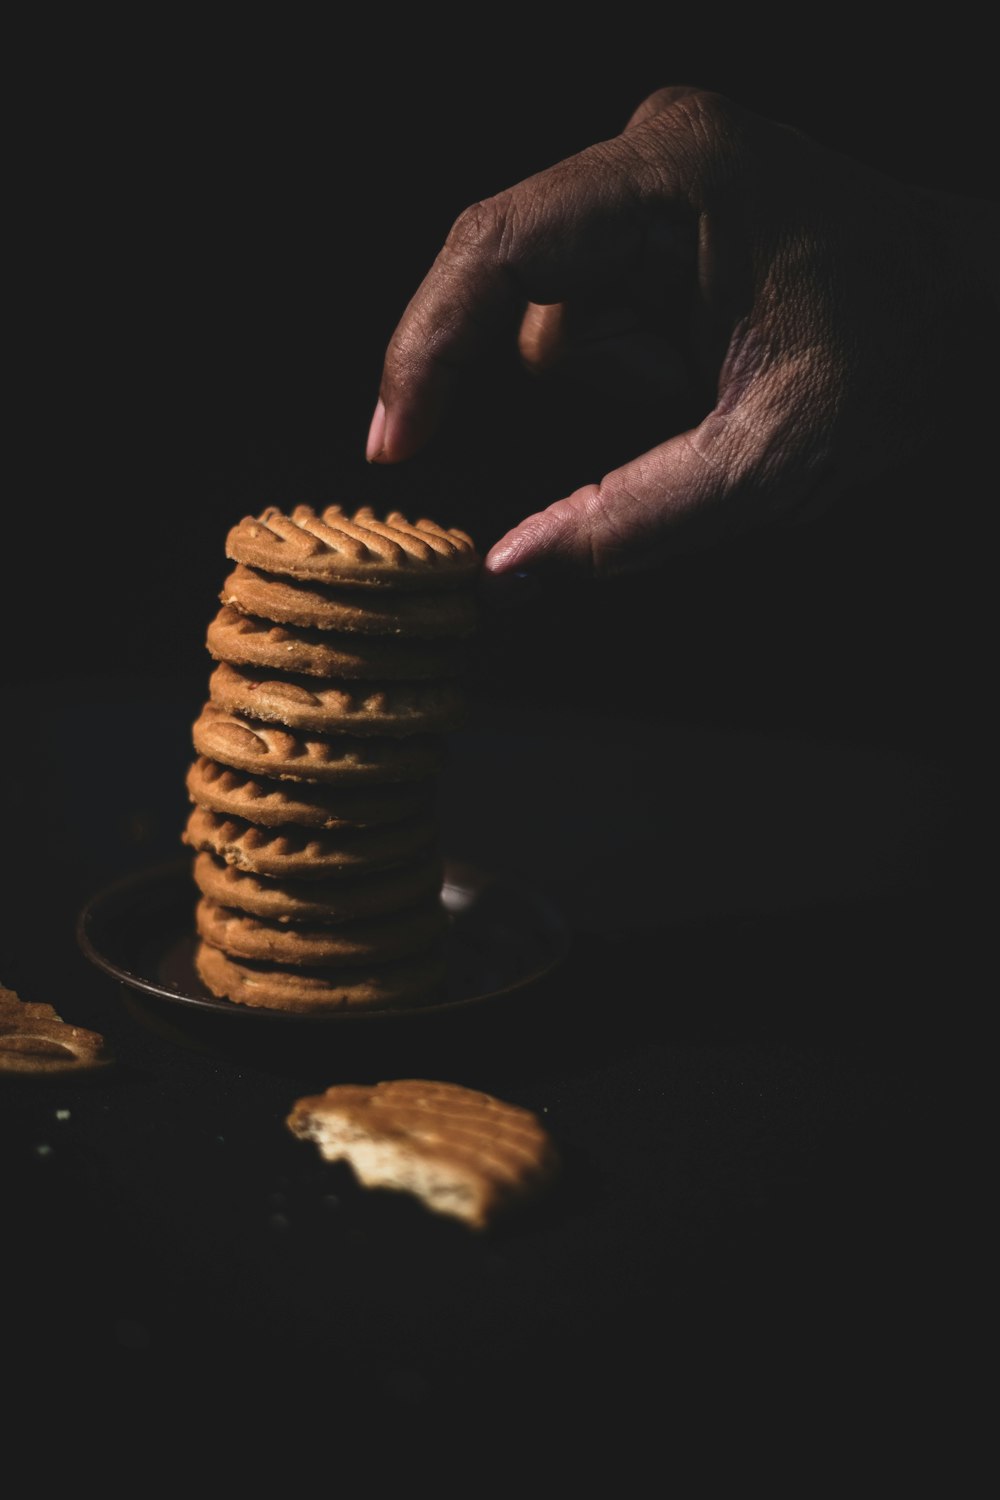 person holding pile of cookies